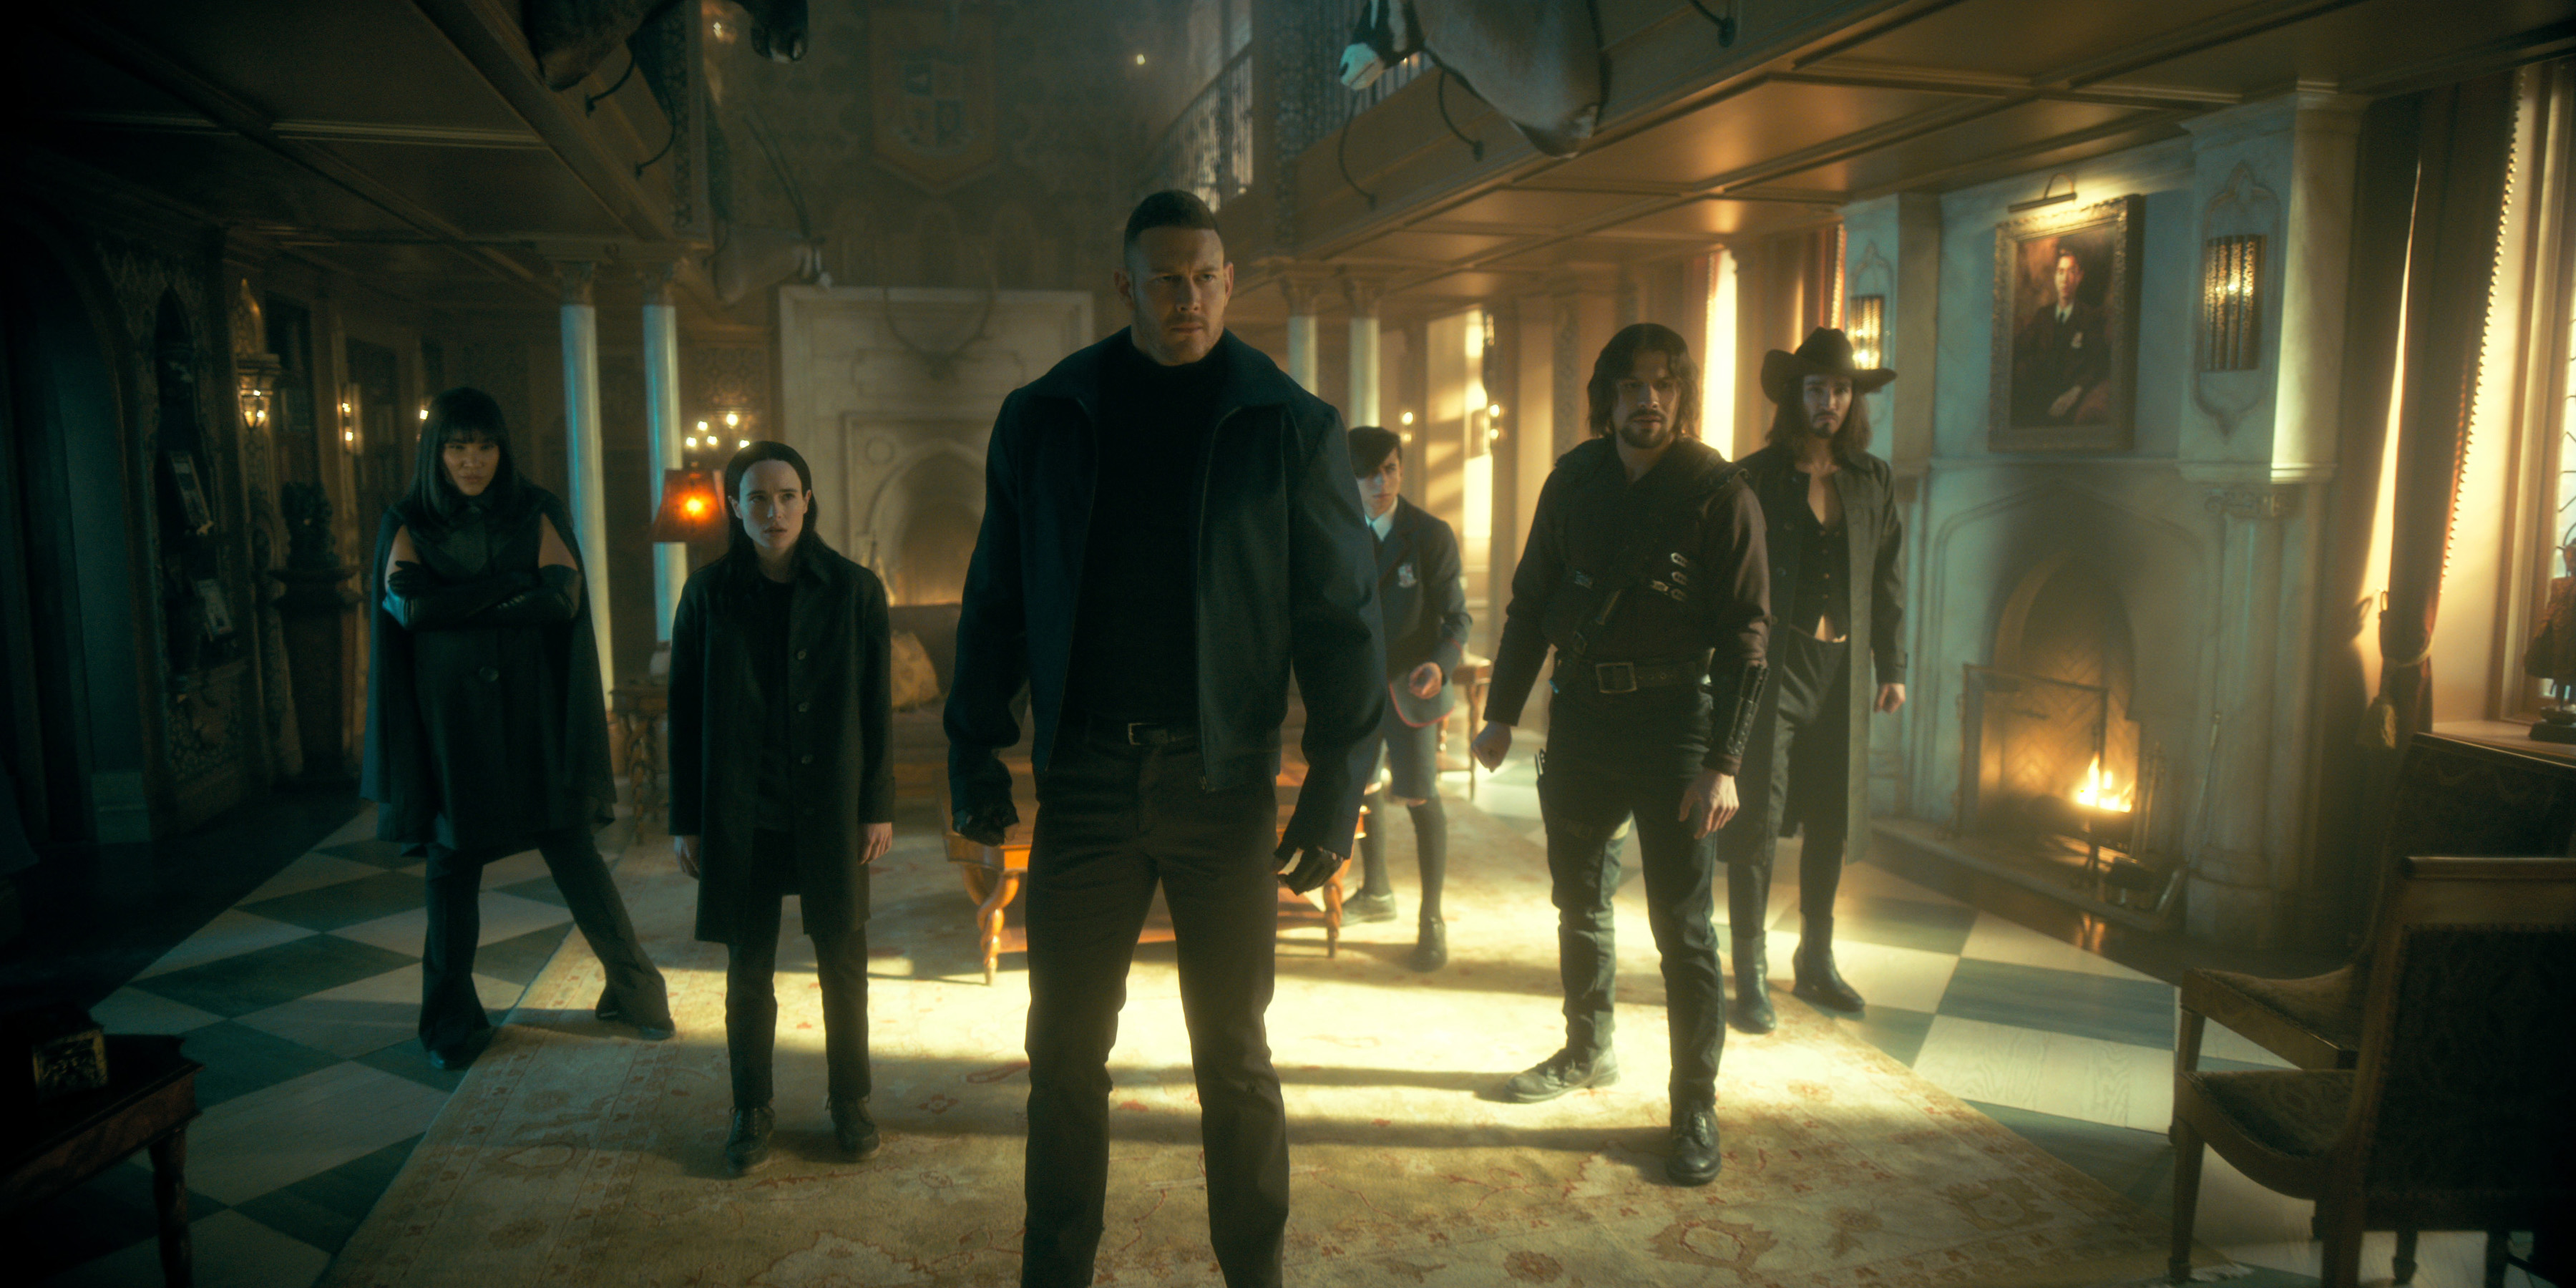 The Umbrella Academy. (L to R) Emmy Raver-Lampman as Allison Hargreeves, Elliot Page, Tom Hopper as Luther Hargreeves, Aidan Gallagher as Number Five, David Castañeda as Diego Hargreeves, Robert Sheehan as Klaus Hargreeves in episode 301 of The Umbrella Academy.